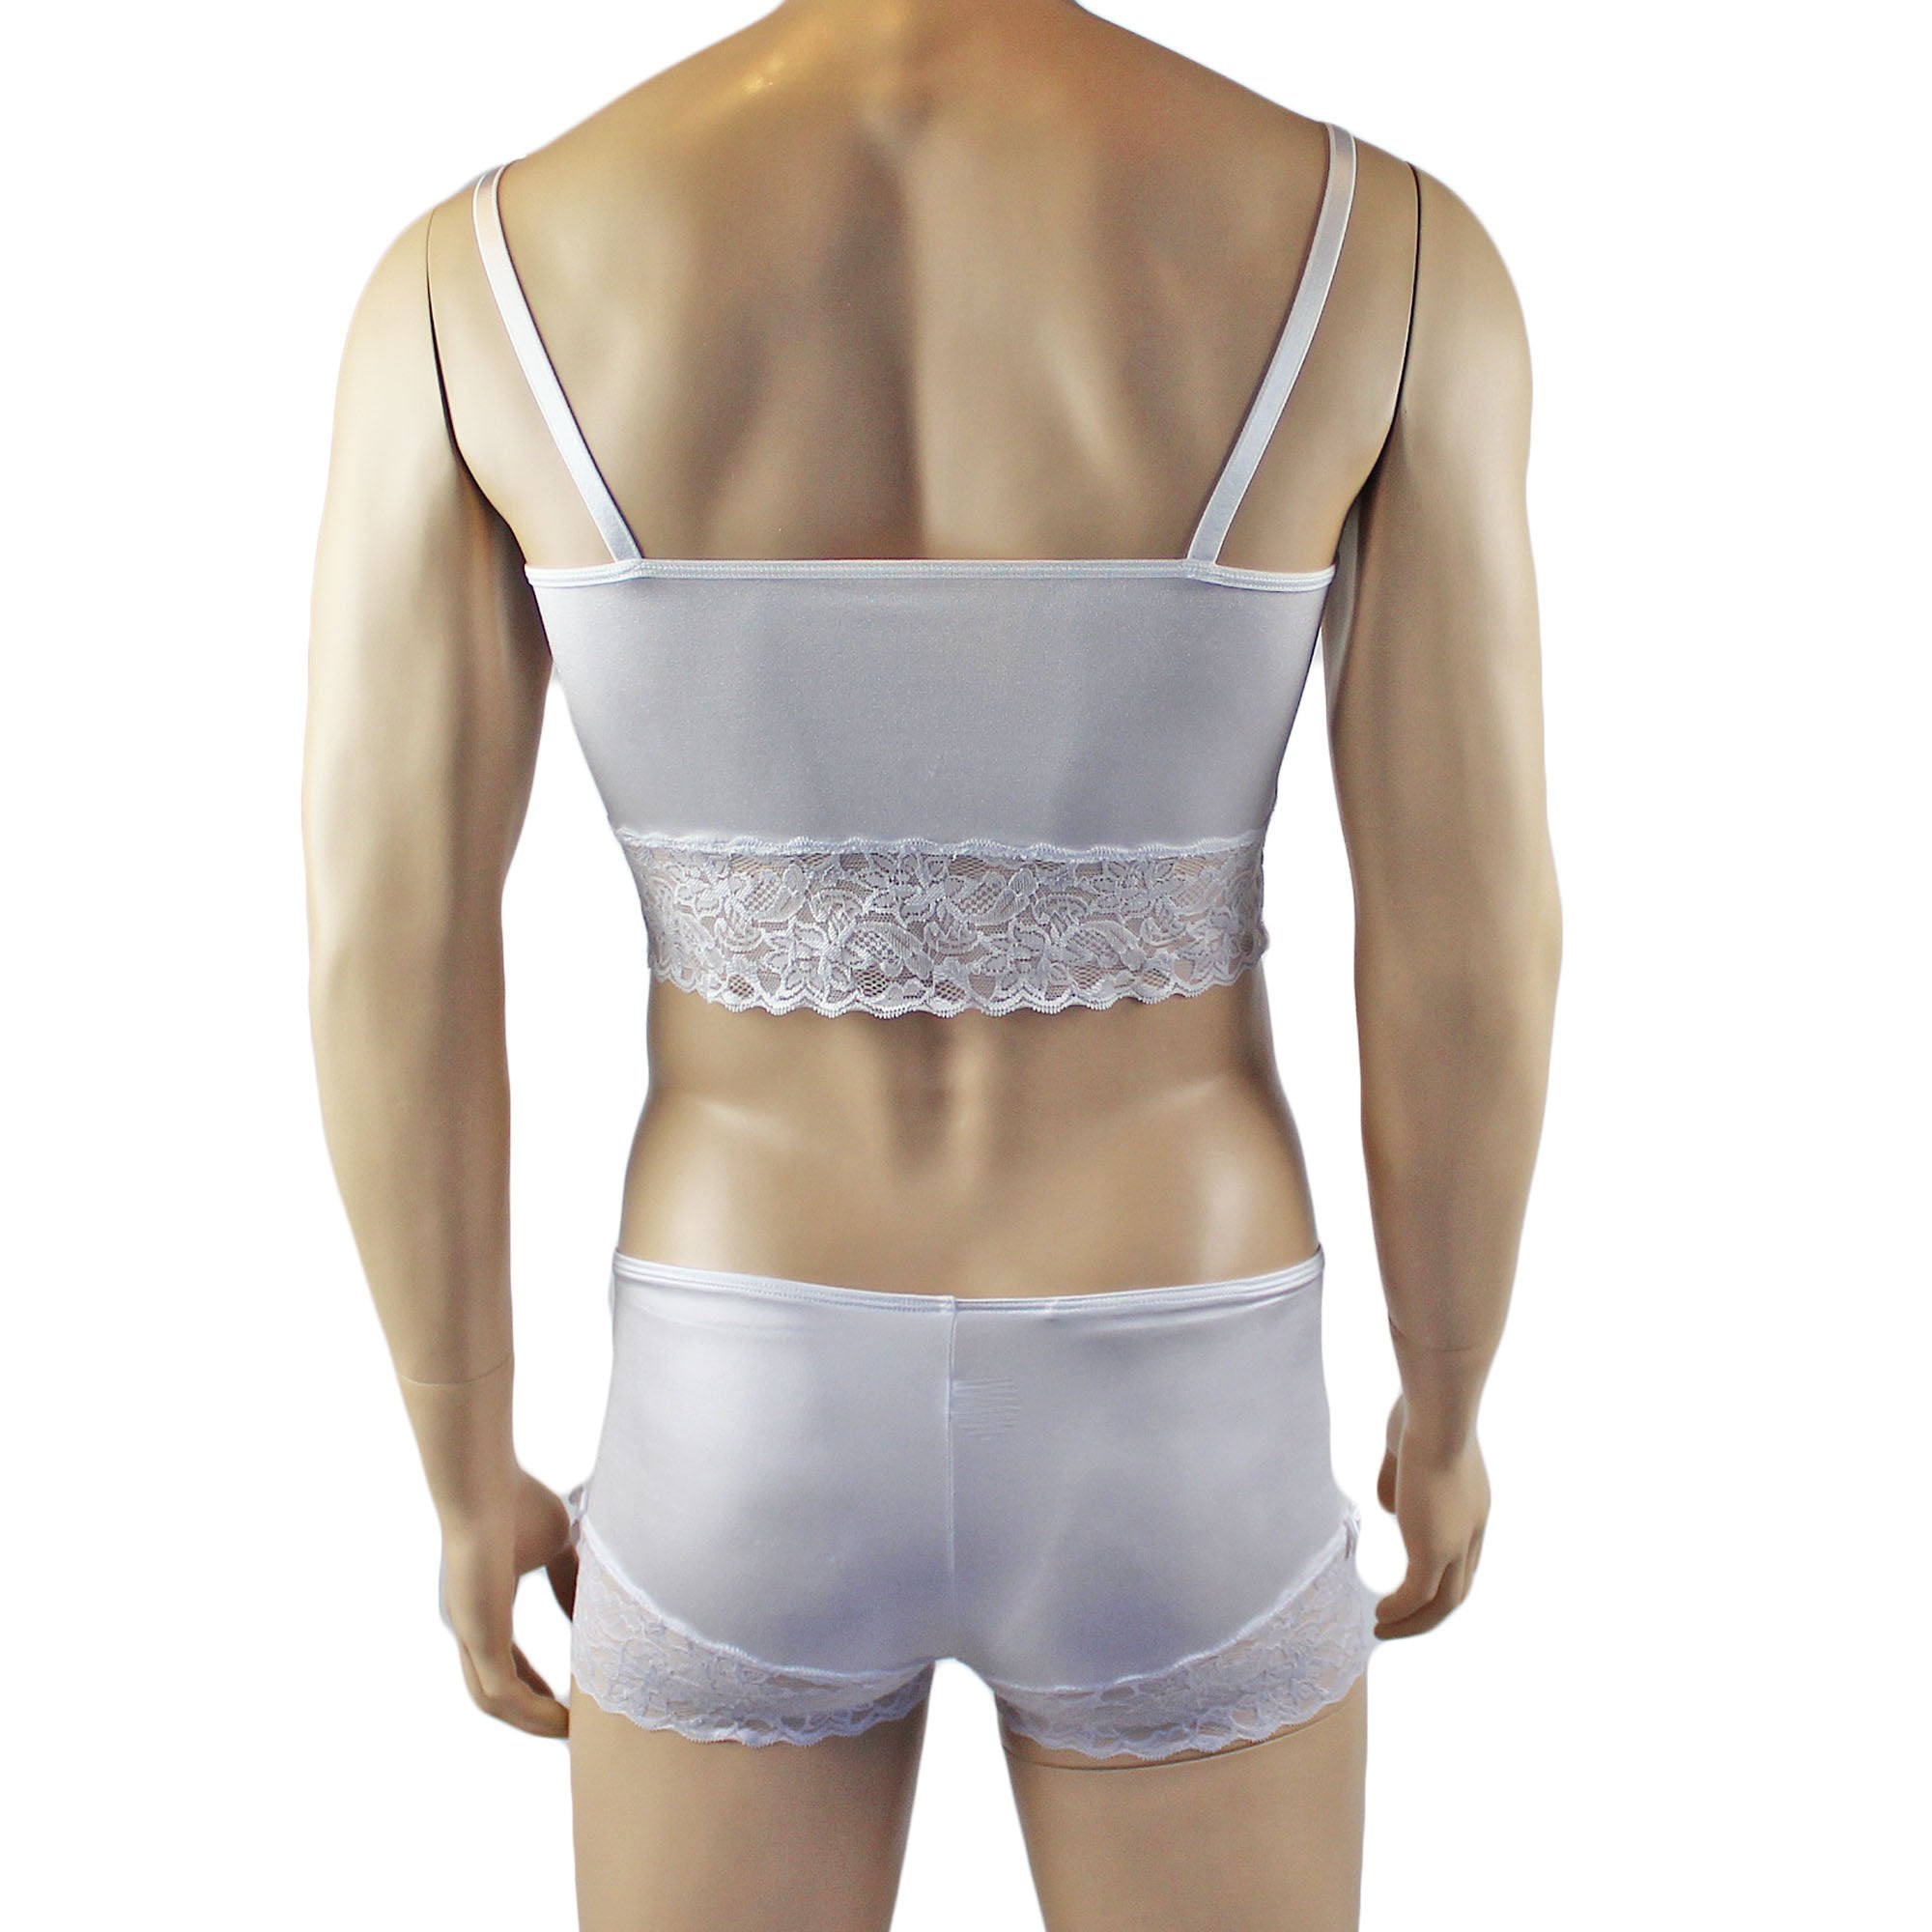 Male Romance Stretch Spandex Camisole Top & Boxer Shorts for Lingerie Men White or Black